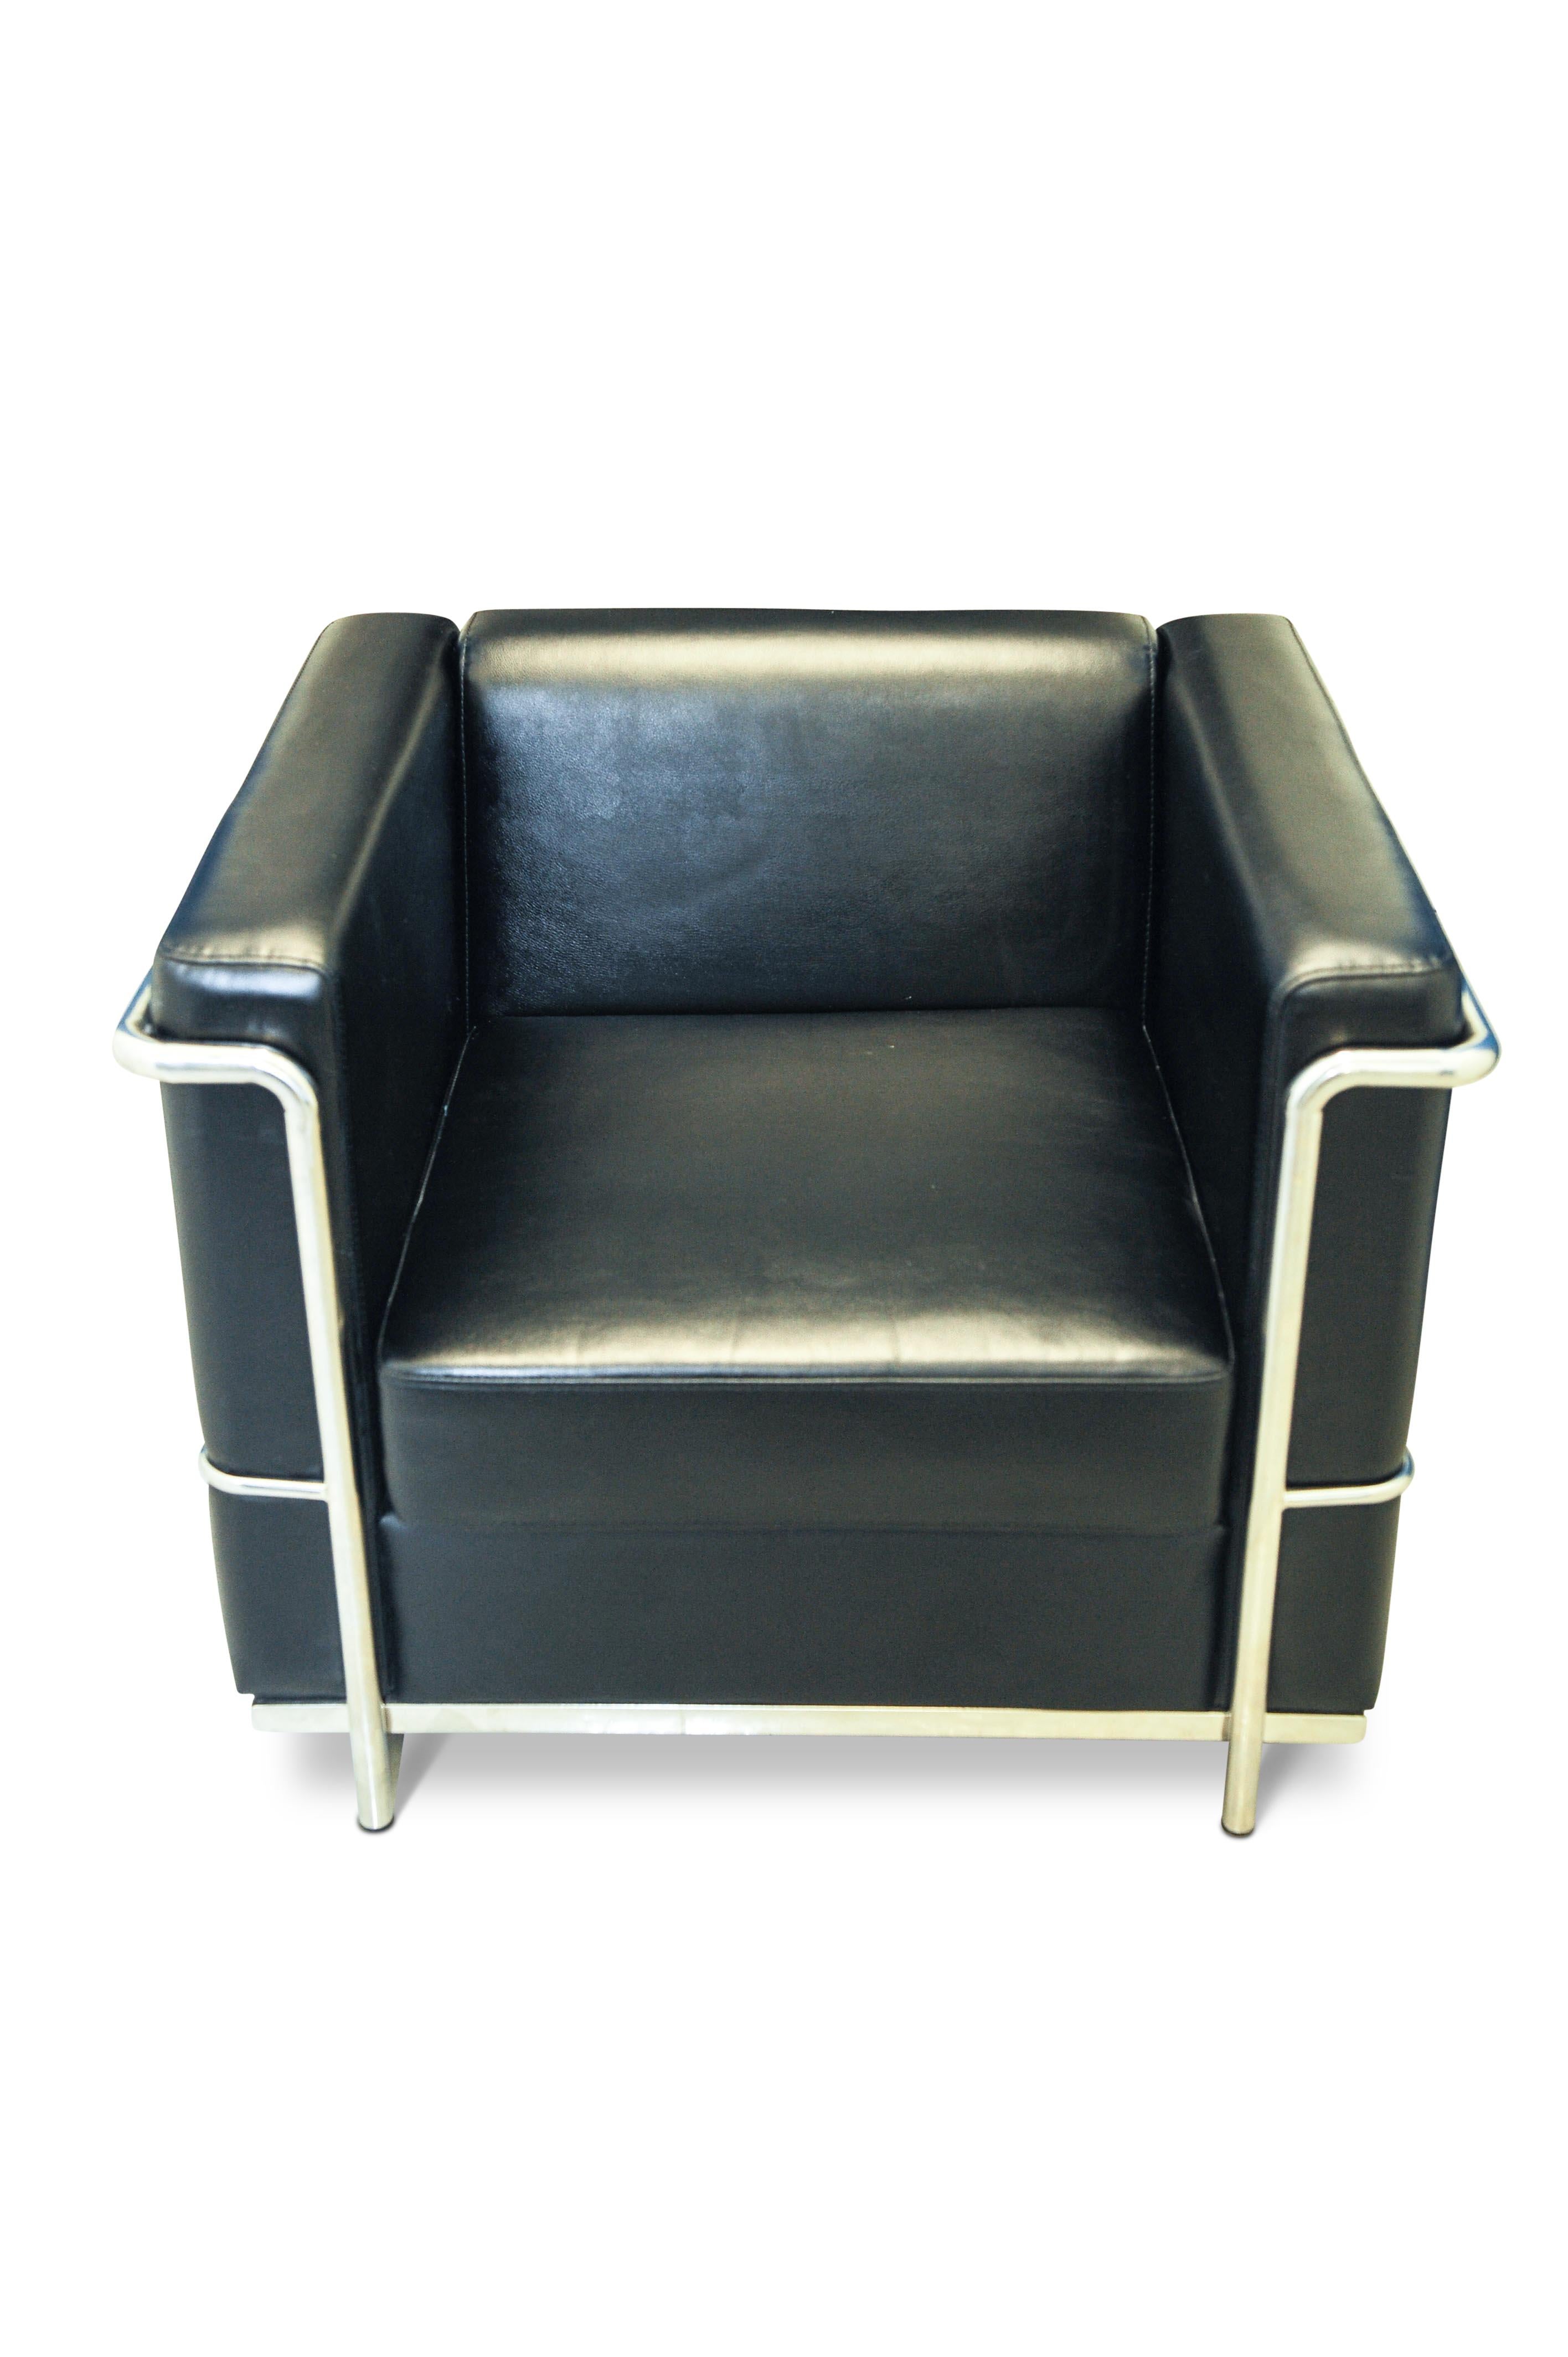 In the manner of Le Corbusier, A LC2 black leather armchair within a chrome frame.

This chair has most certainly been styled to represent the iconic Corbusier LC2 lounge chair of the 1920s. Designed by Charlotte Perriand and Pierre